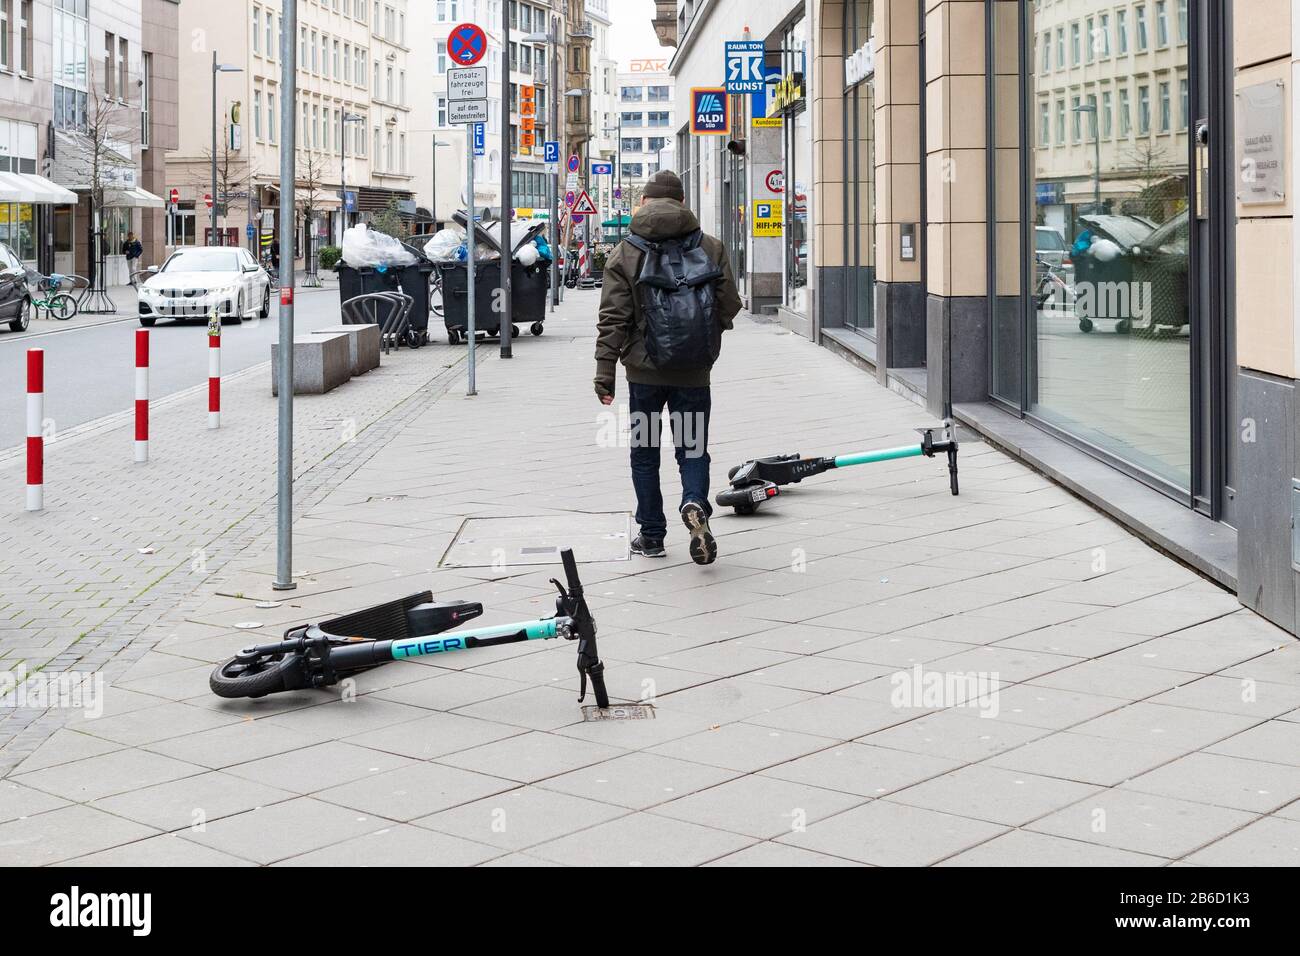 Tier dockless E scooters dumped on Frankfurt street creating a tripping hazard for pedestrians, Germany Stock Photo